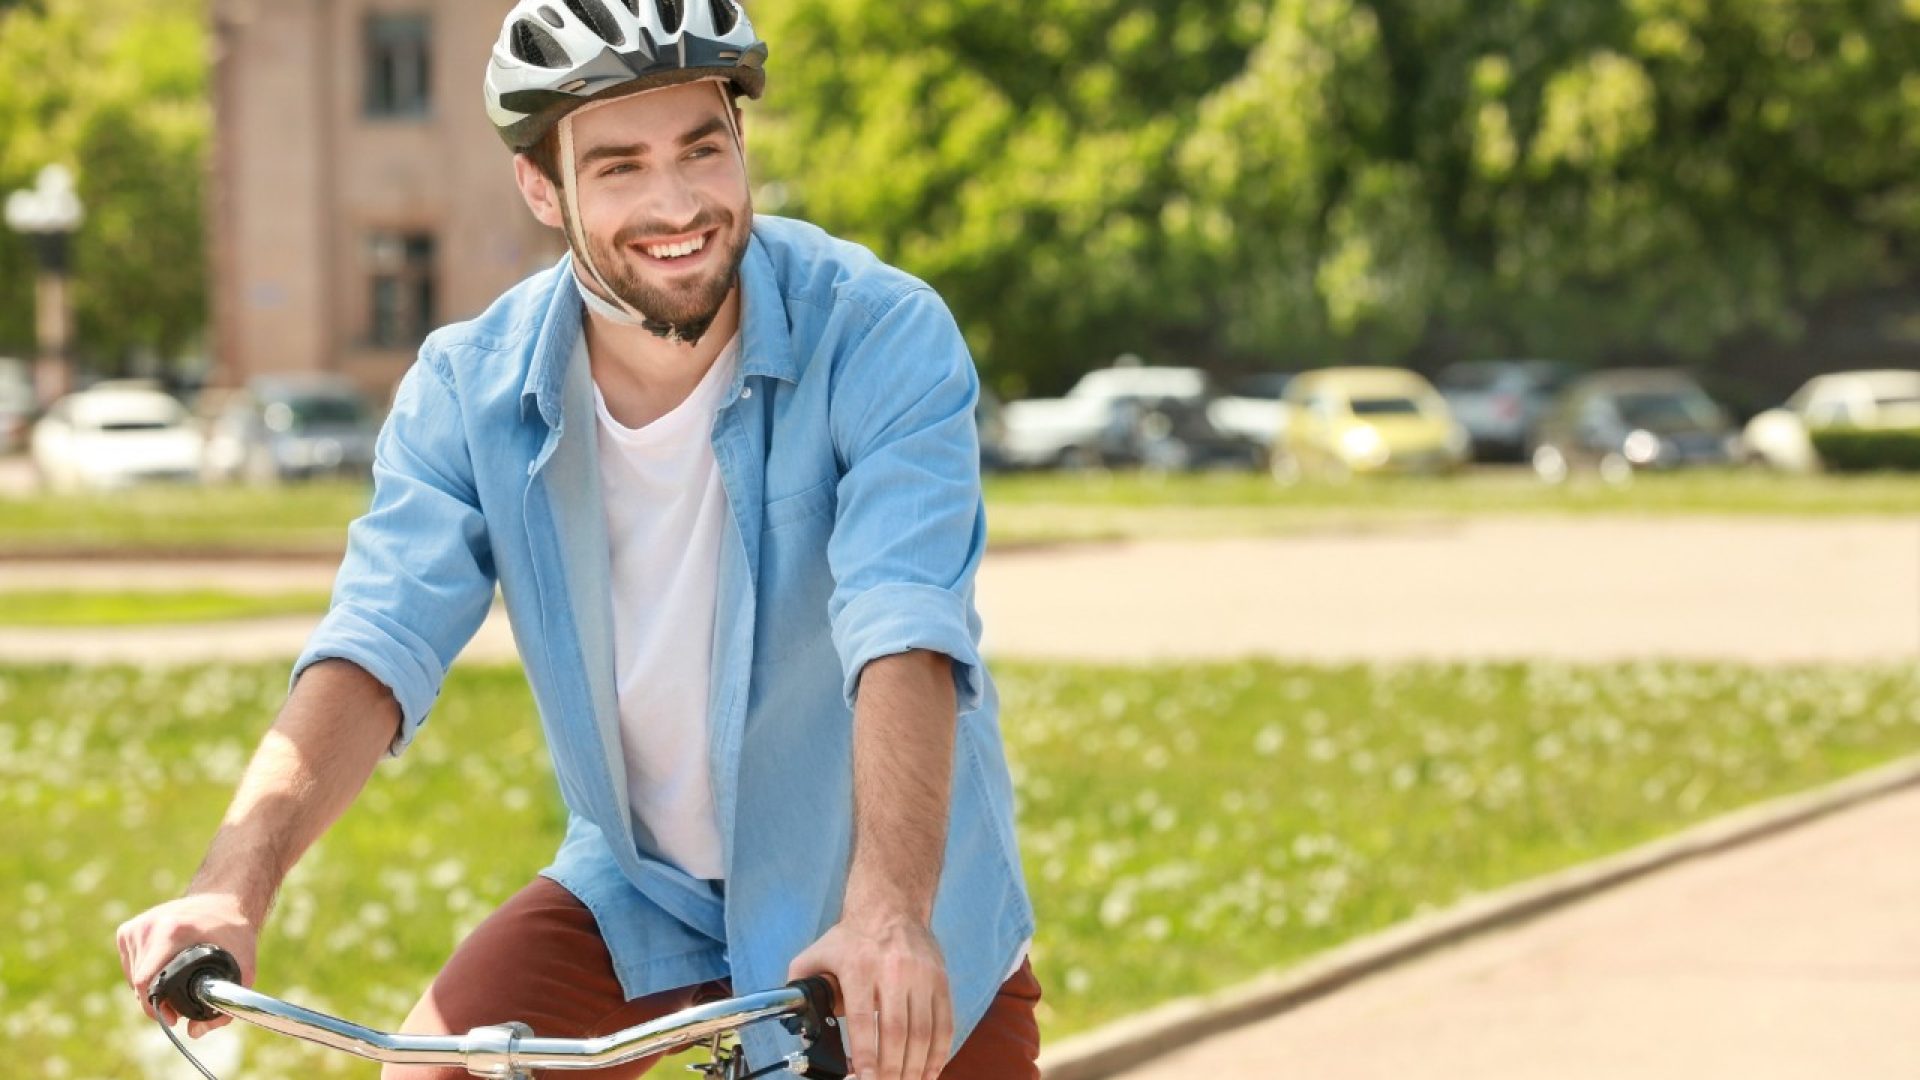 Handsome young man riding bicycle in park on sunny day